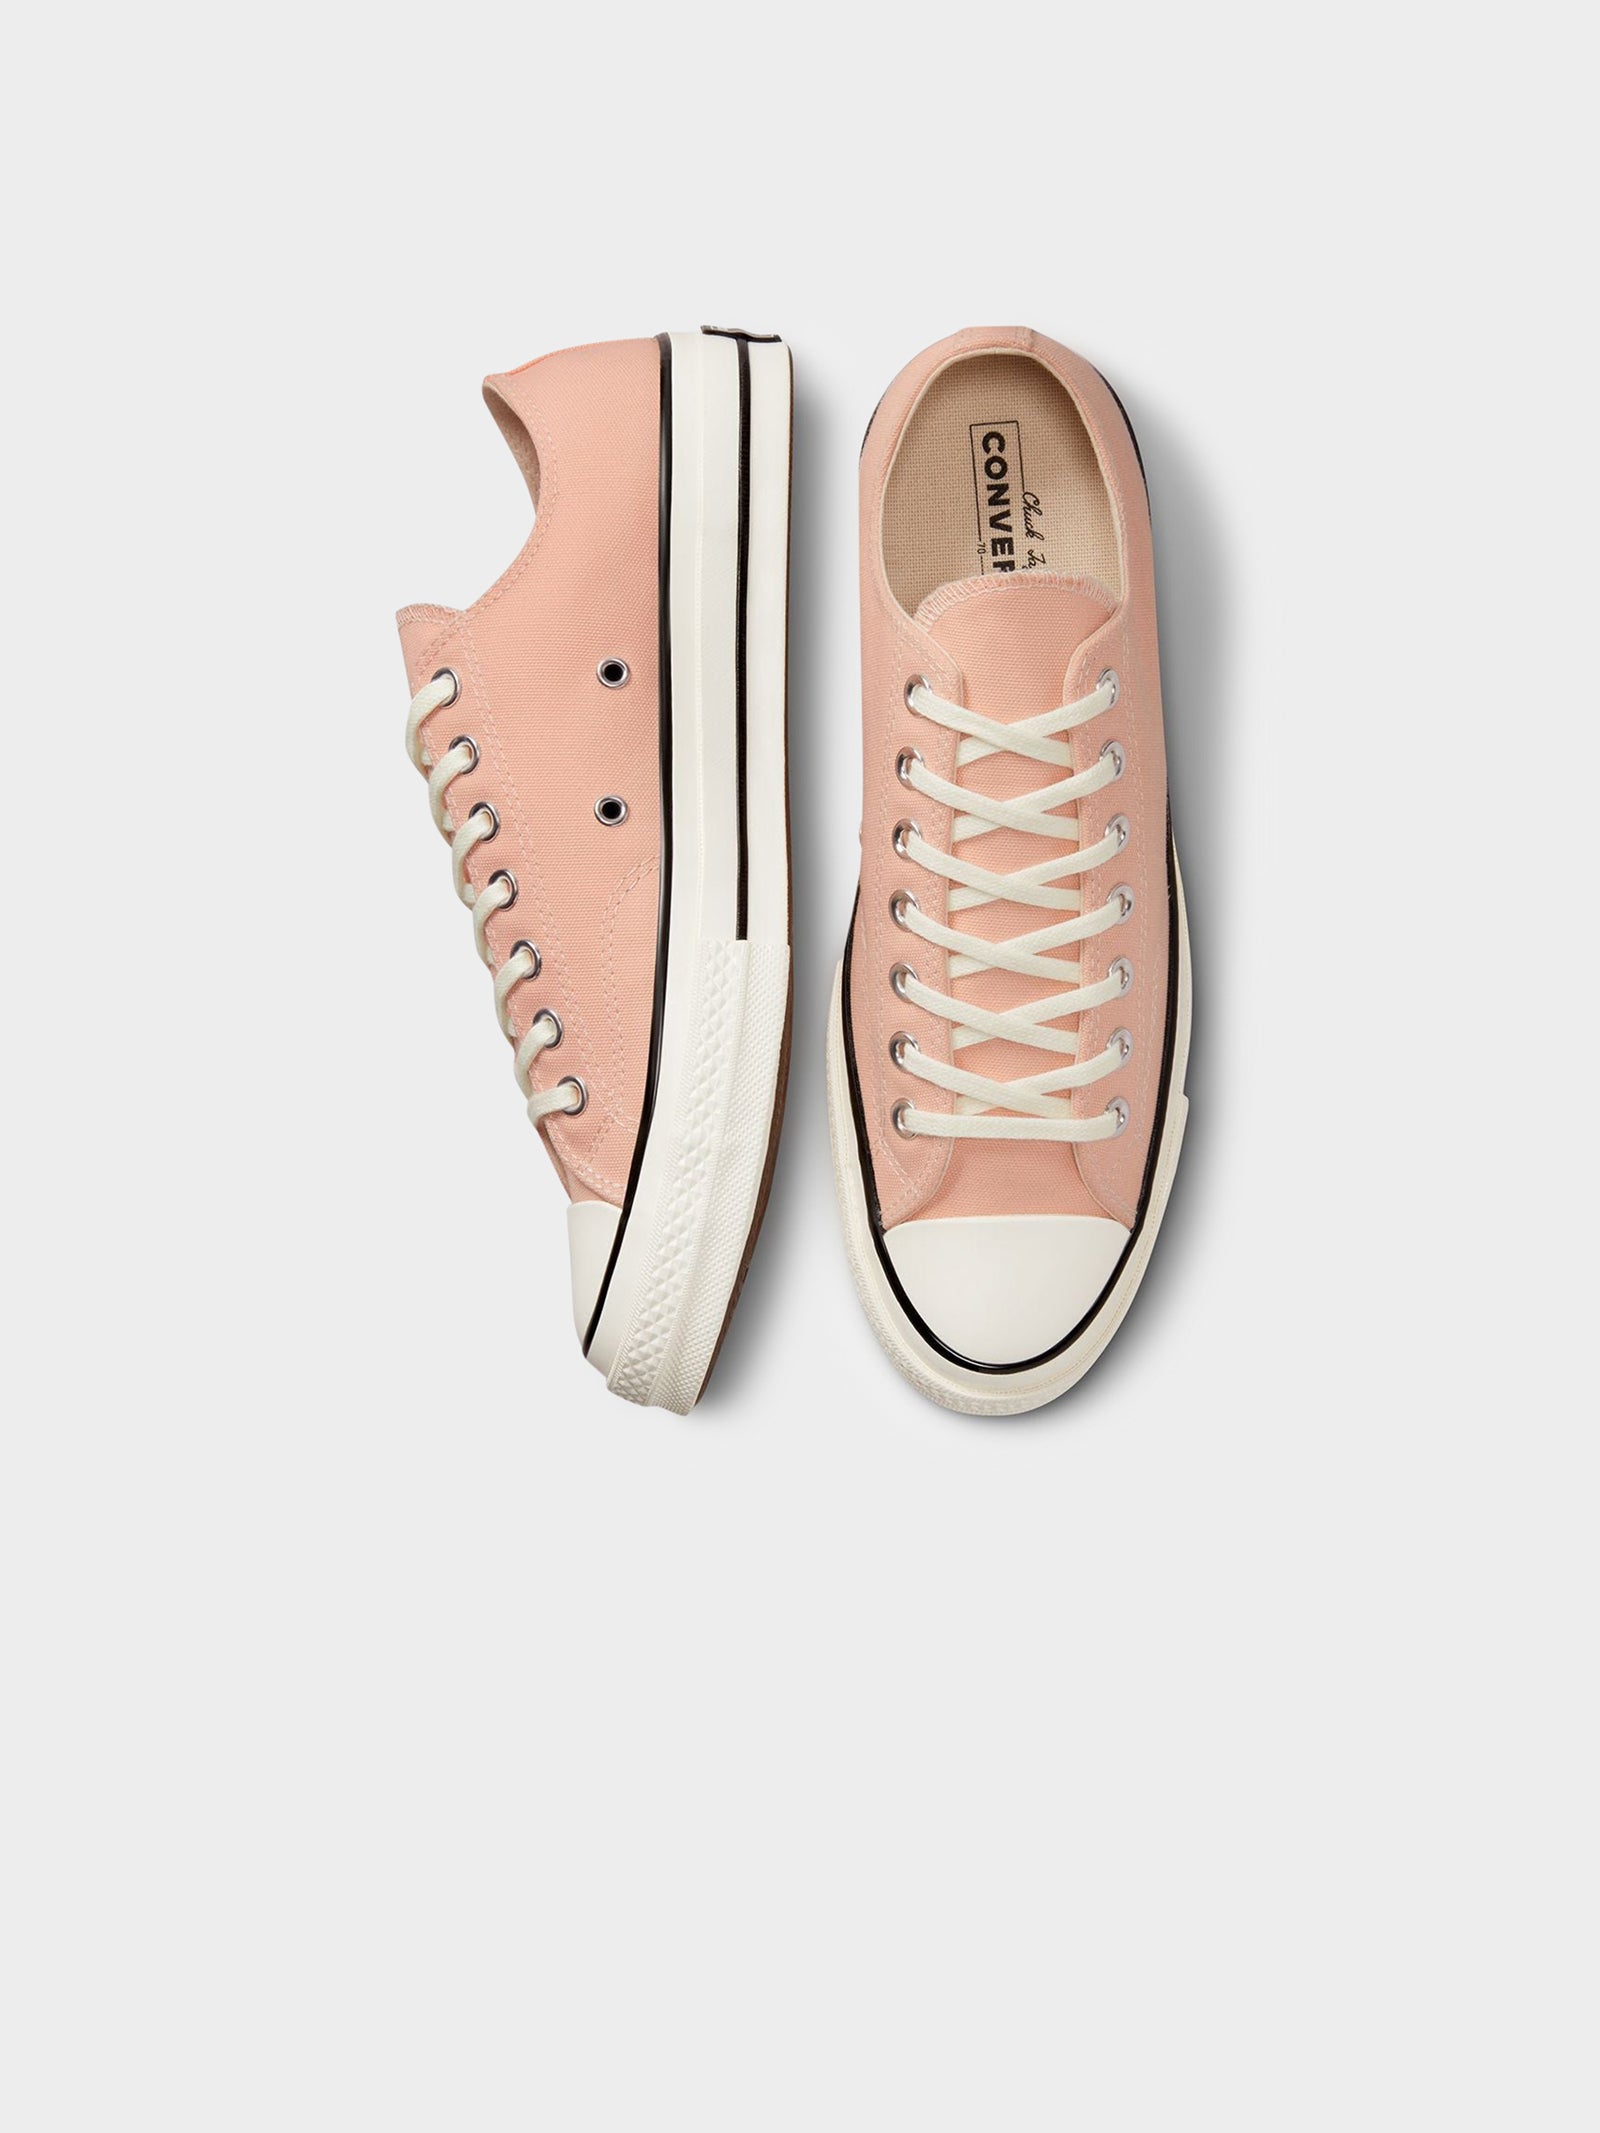 Unisex Converse Chuck 70 Summer Tone Low Top Sneakers in Cheeky Coral